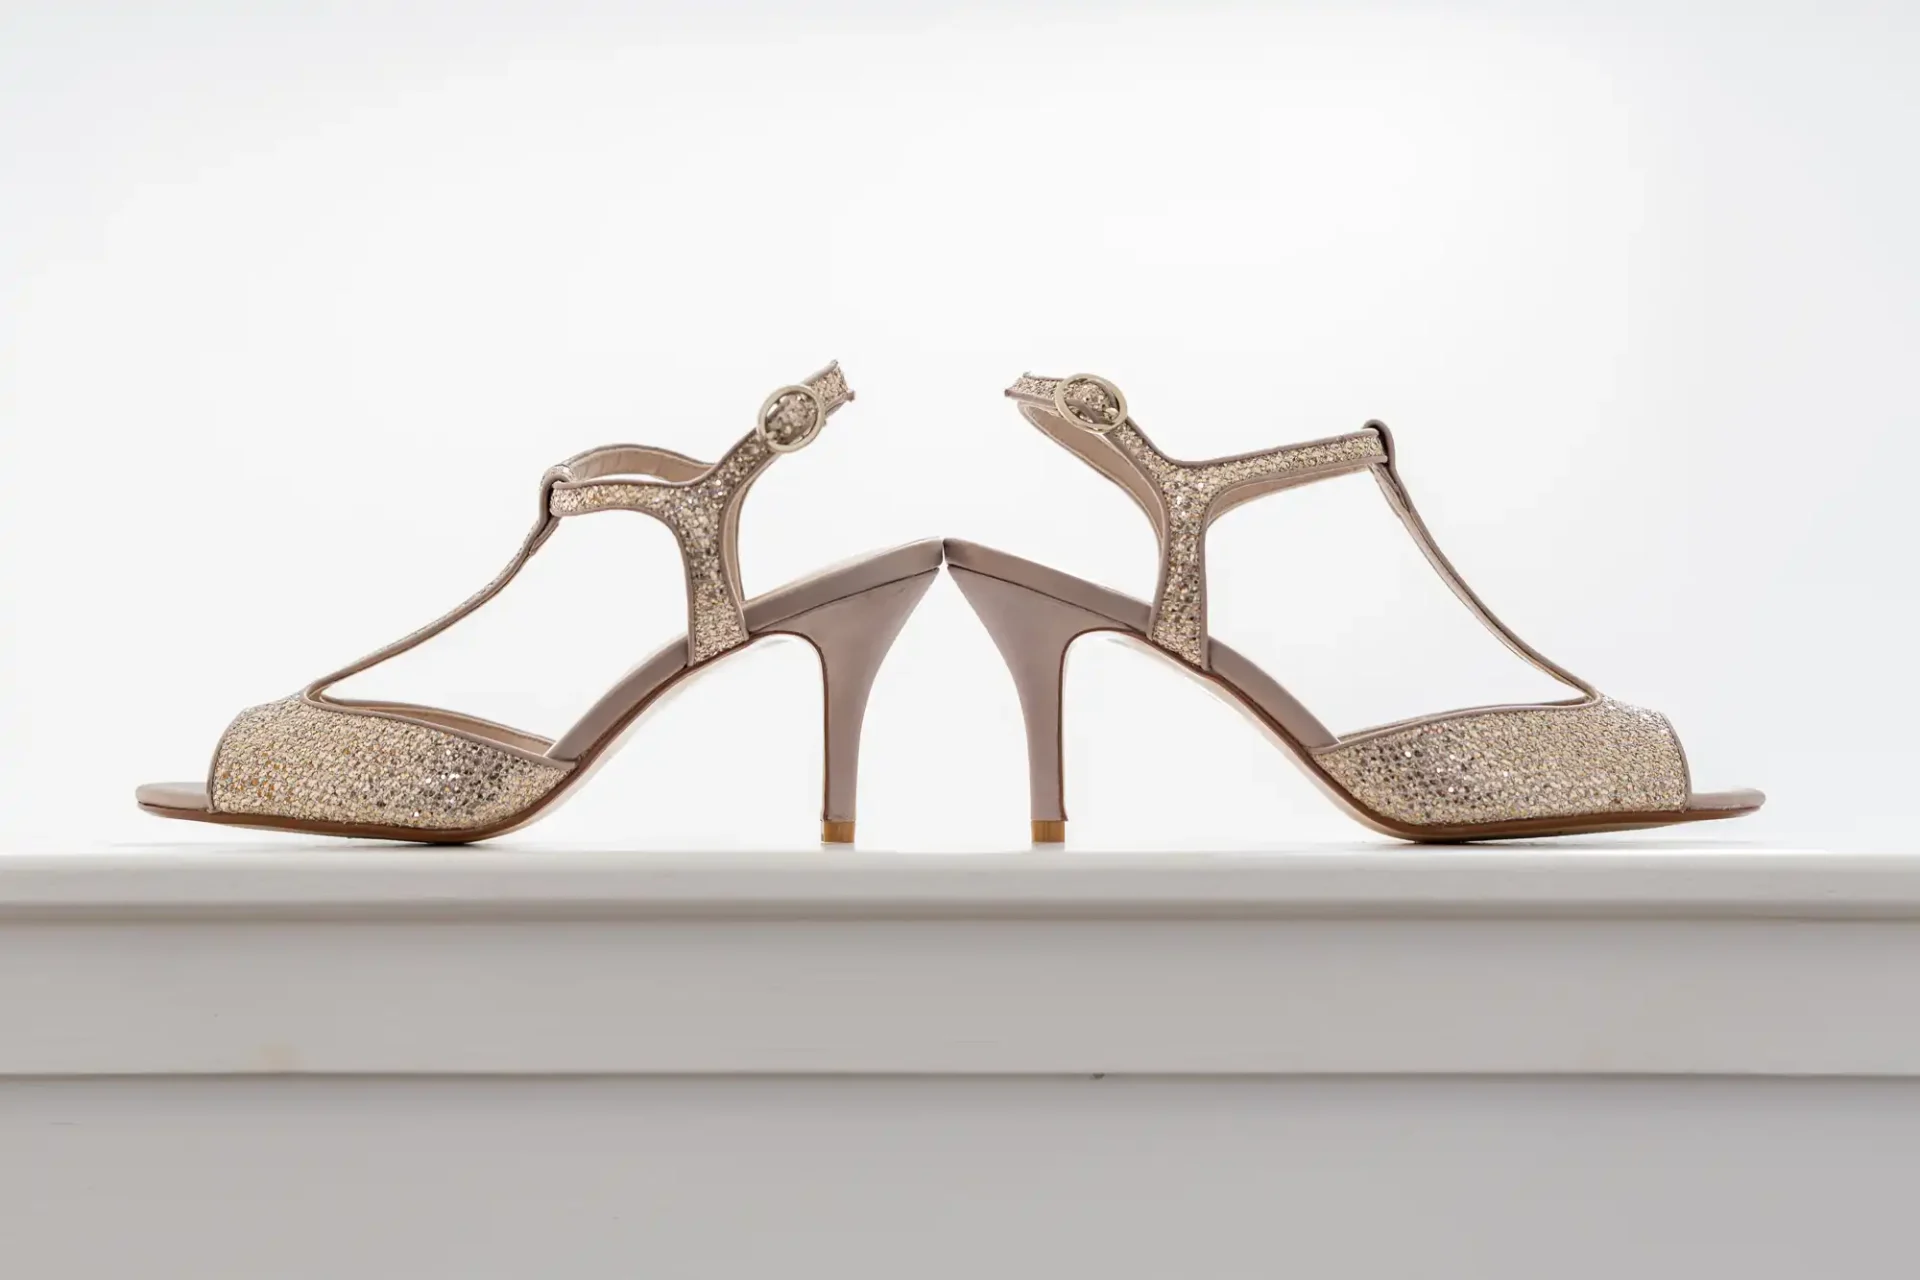 A pair of elegant high-heeled sandals with glittery embellishments on a white background.